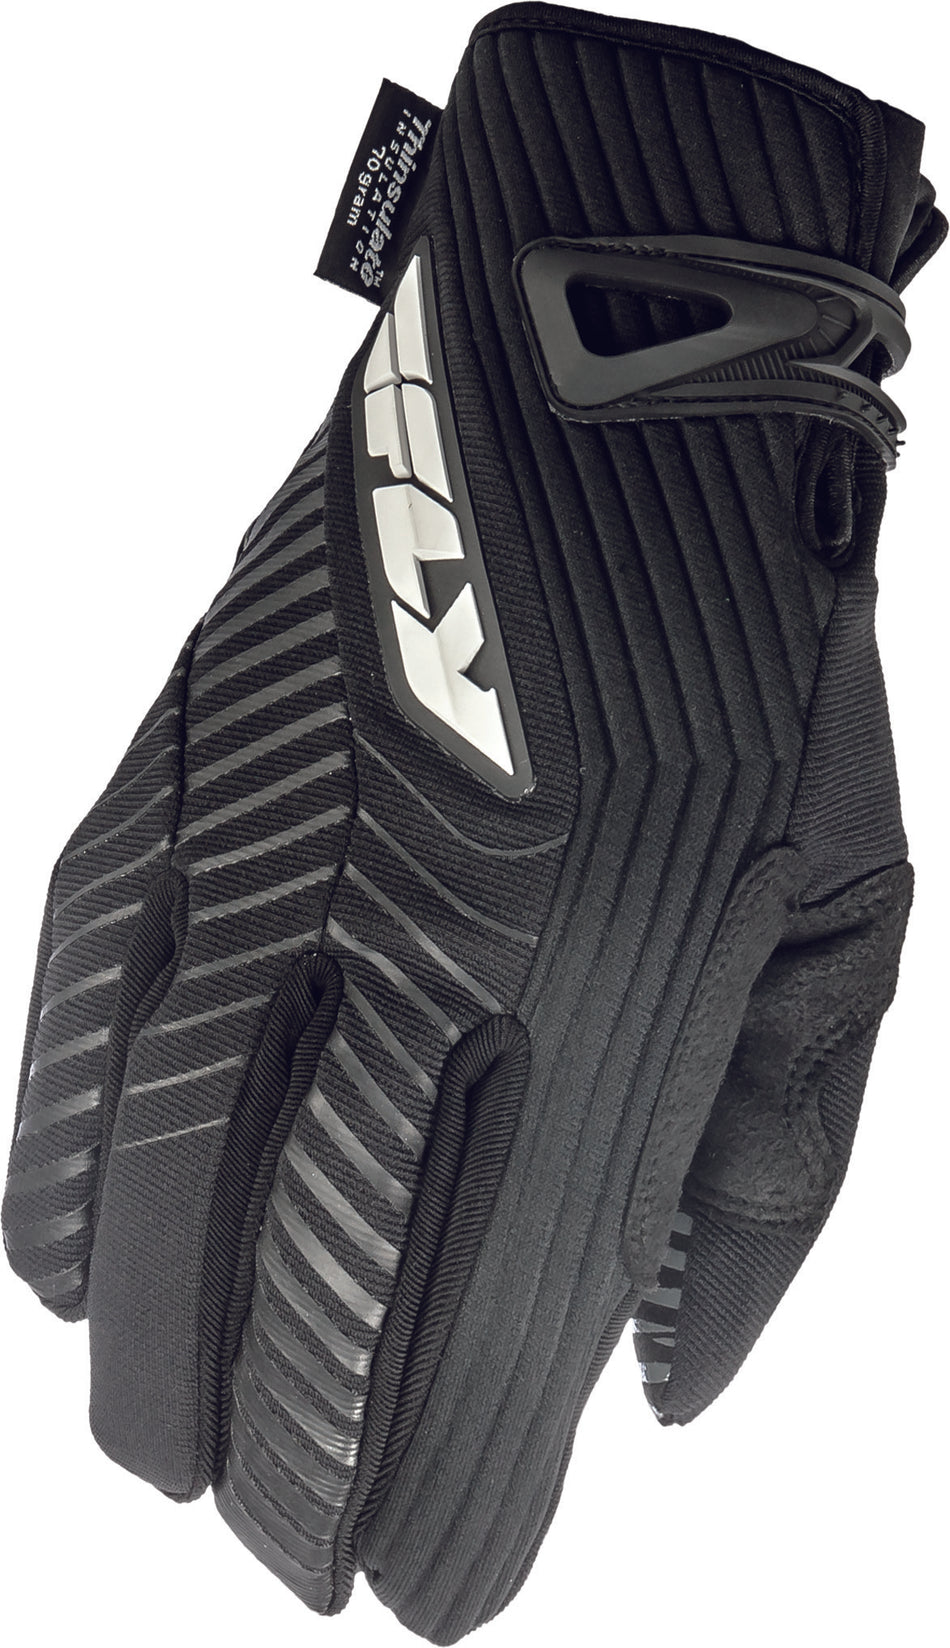 FLY RACING Title Gloves Long Black Sz 6 #5884 367-040~06